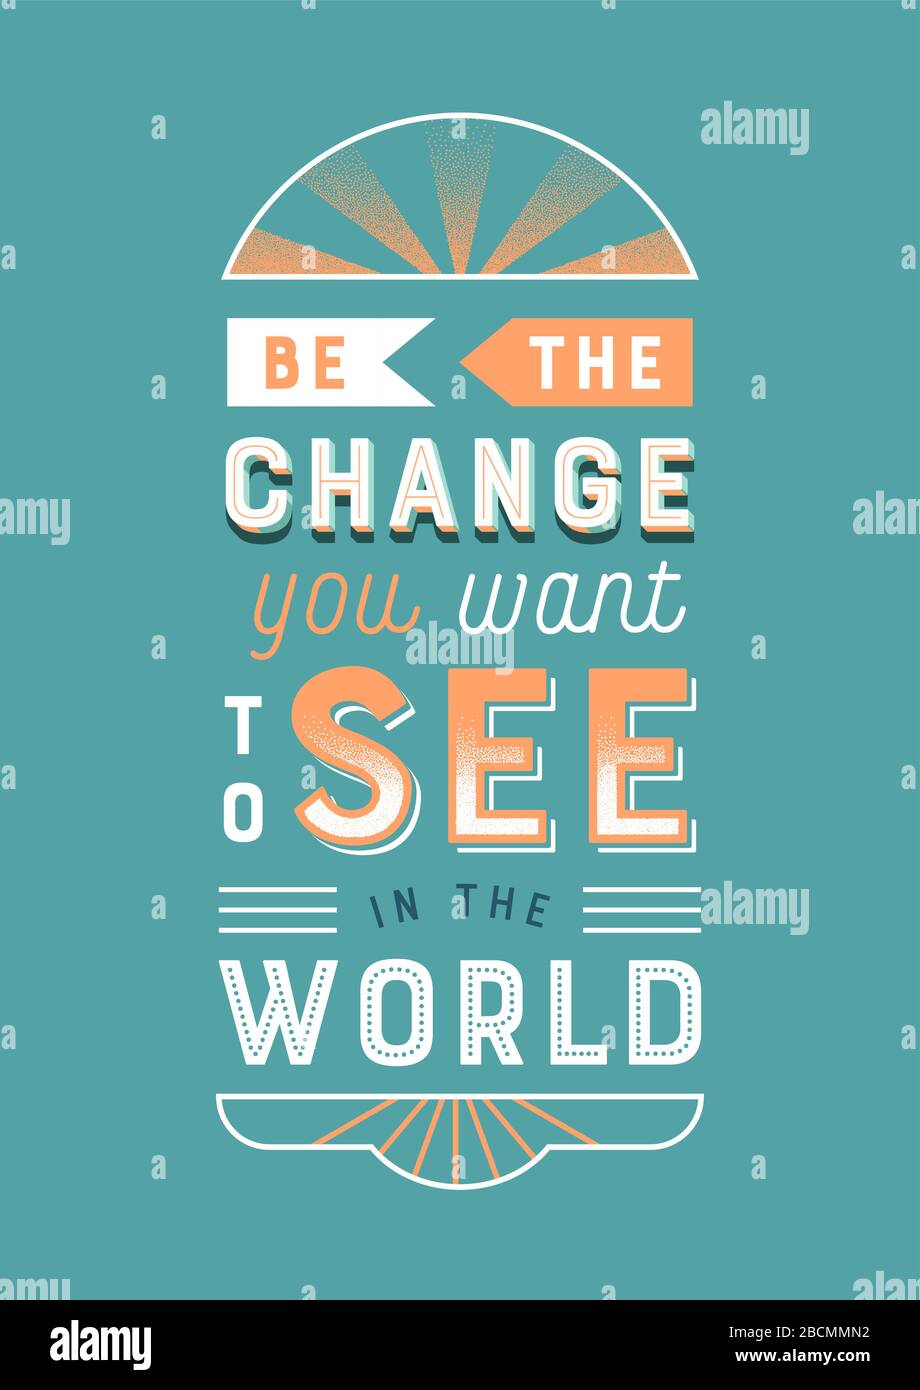 Be the change you want to see in world typography quote poster illustration. Retro style lettering text design with motivational message for creative Stock Vector